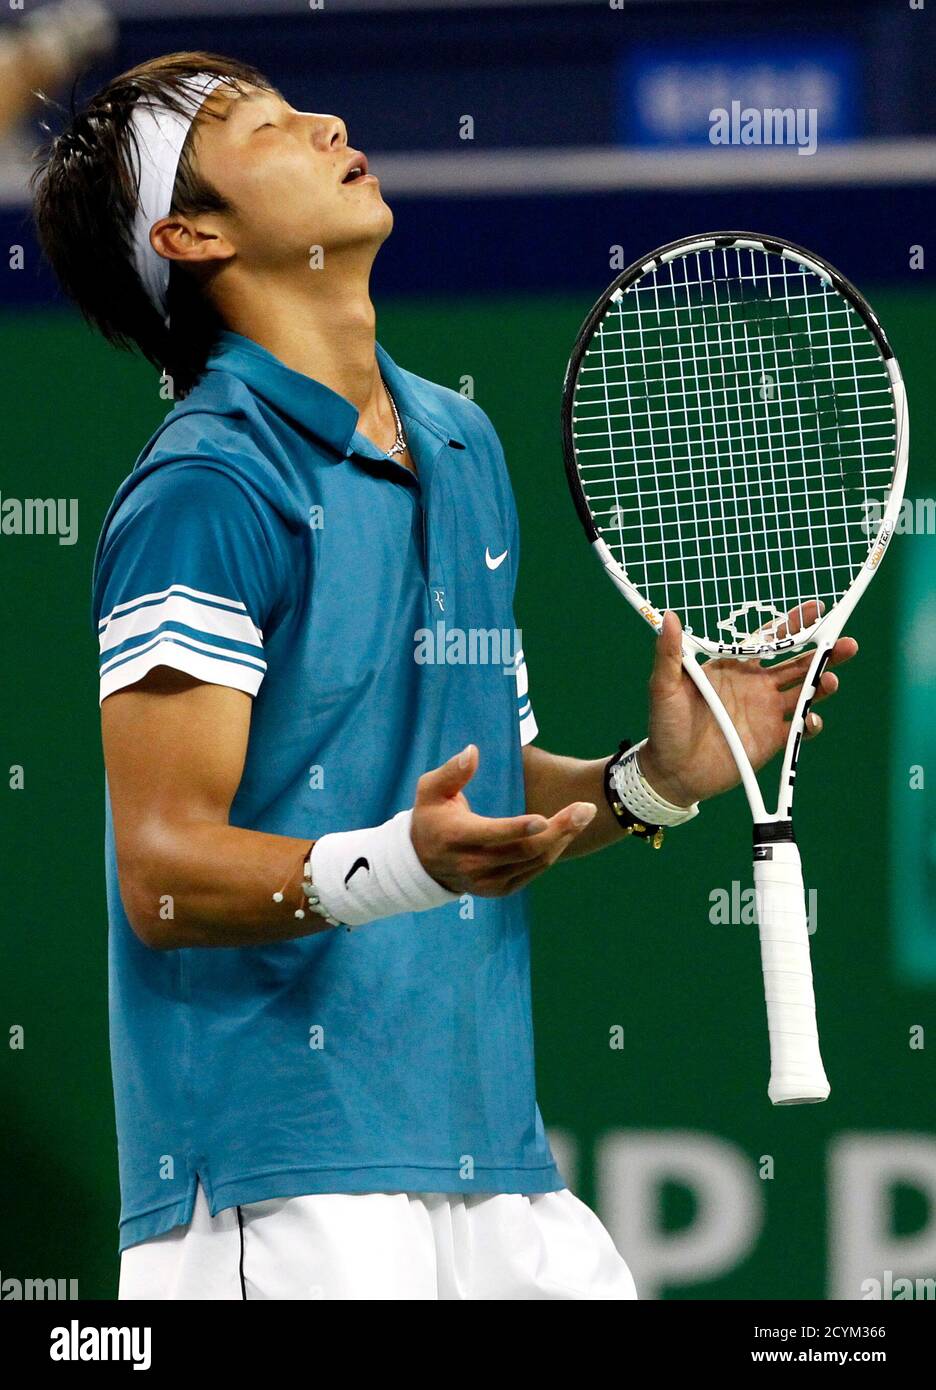 Bai Yan of China reacts during his match against Andy Murray of Britain at  the Shanghai Masters tennis tournament October 13, 2010. REUTERS/Aly Song  (CHINA - Tags: SPORT TENNIS Stock Photo - Alamy